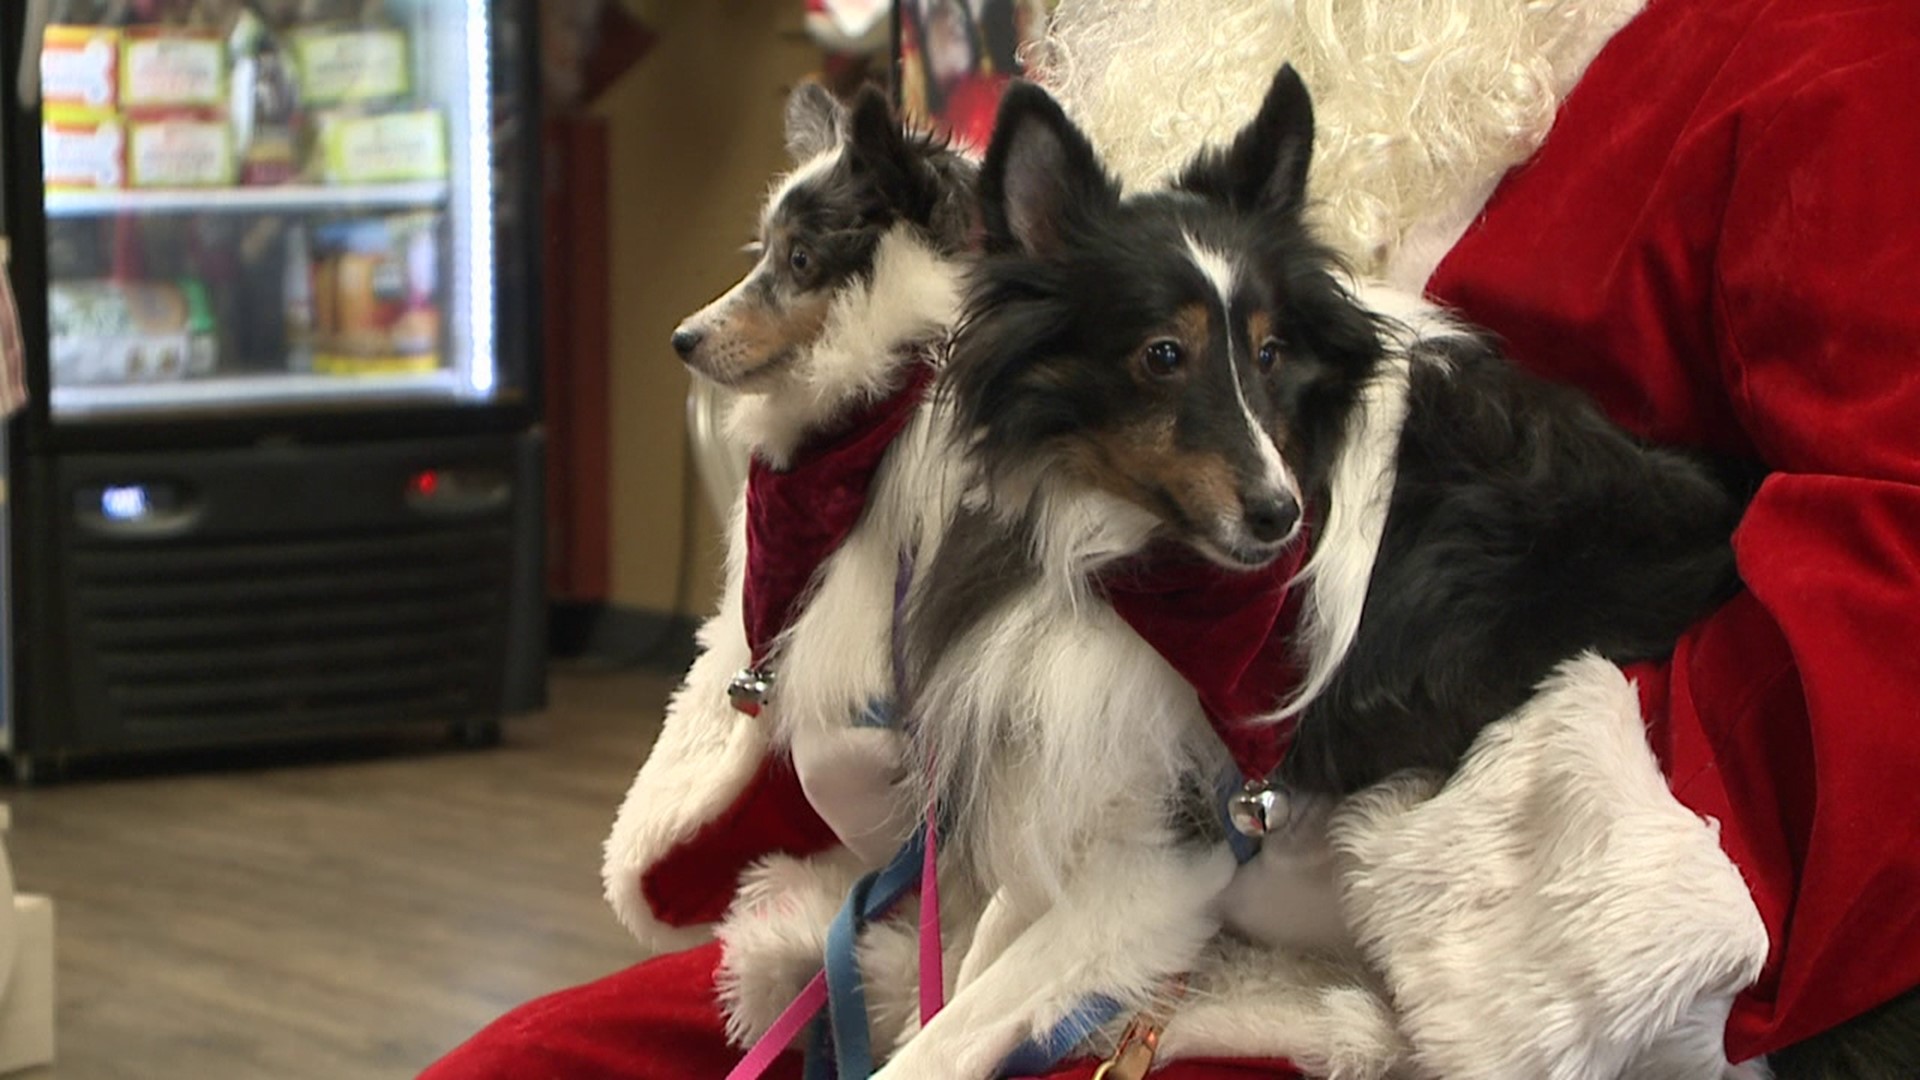 Santa visited his furry friends from 11 a.m. to 3 p.m. on Sunday.